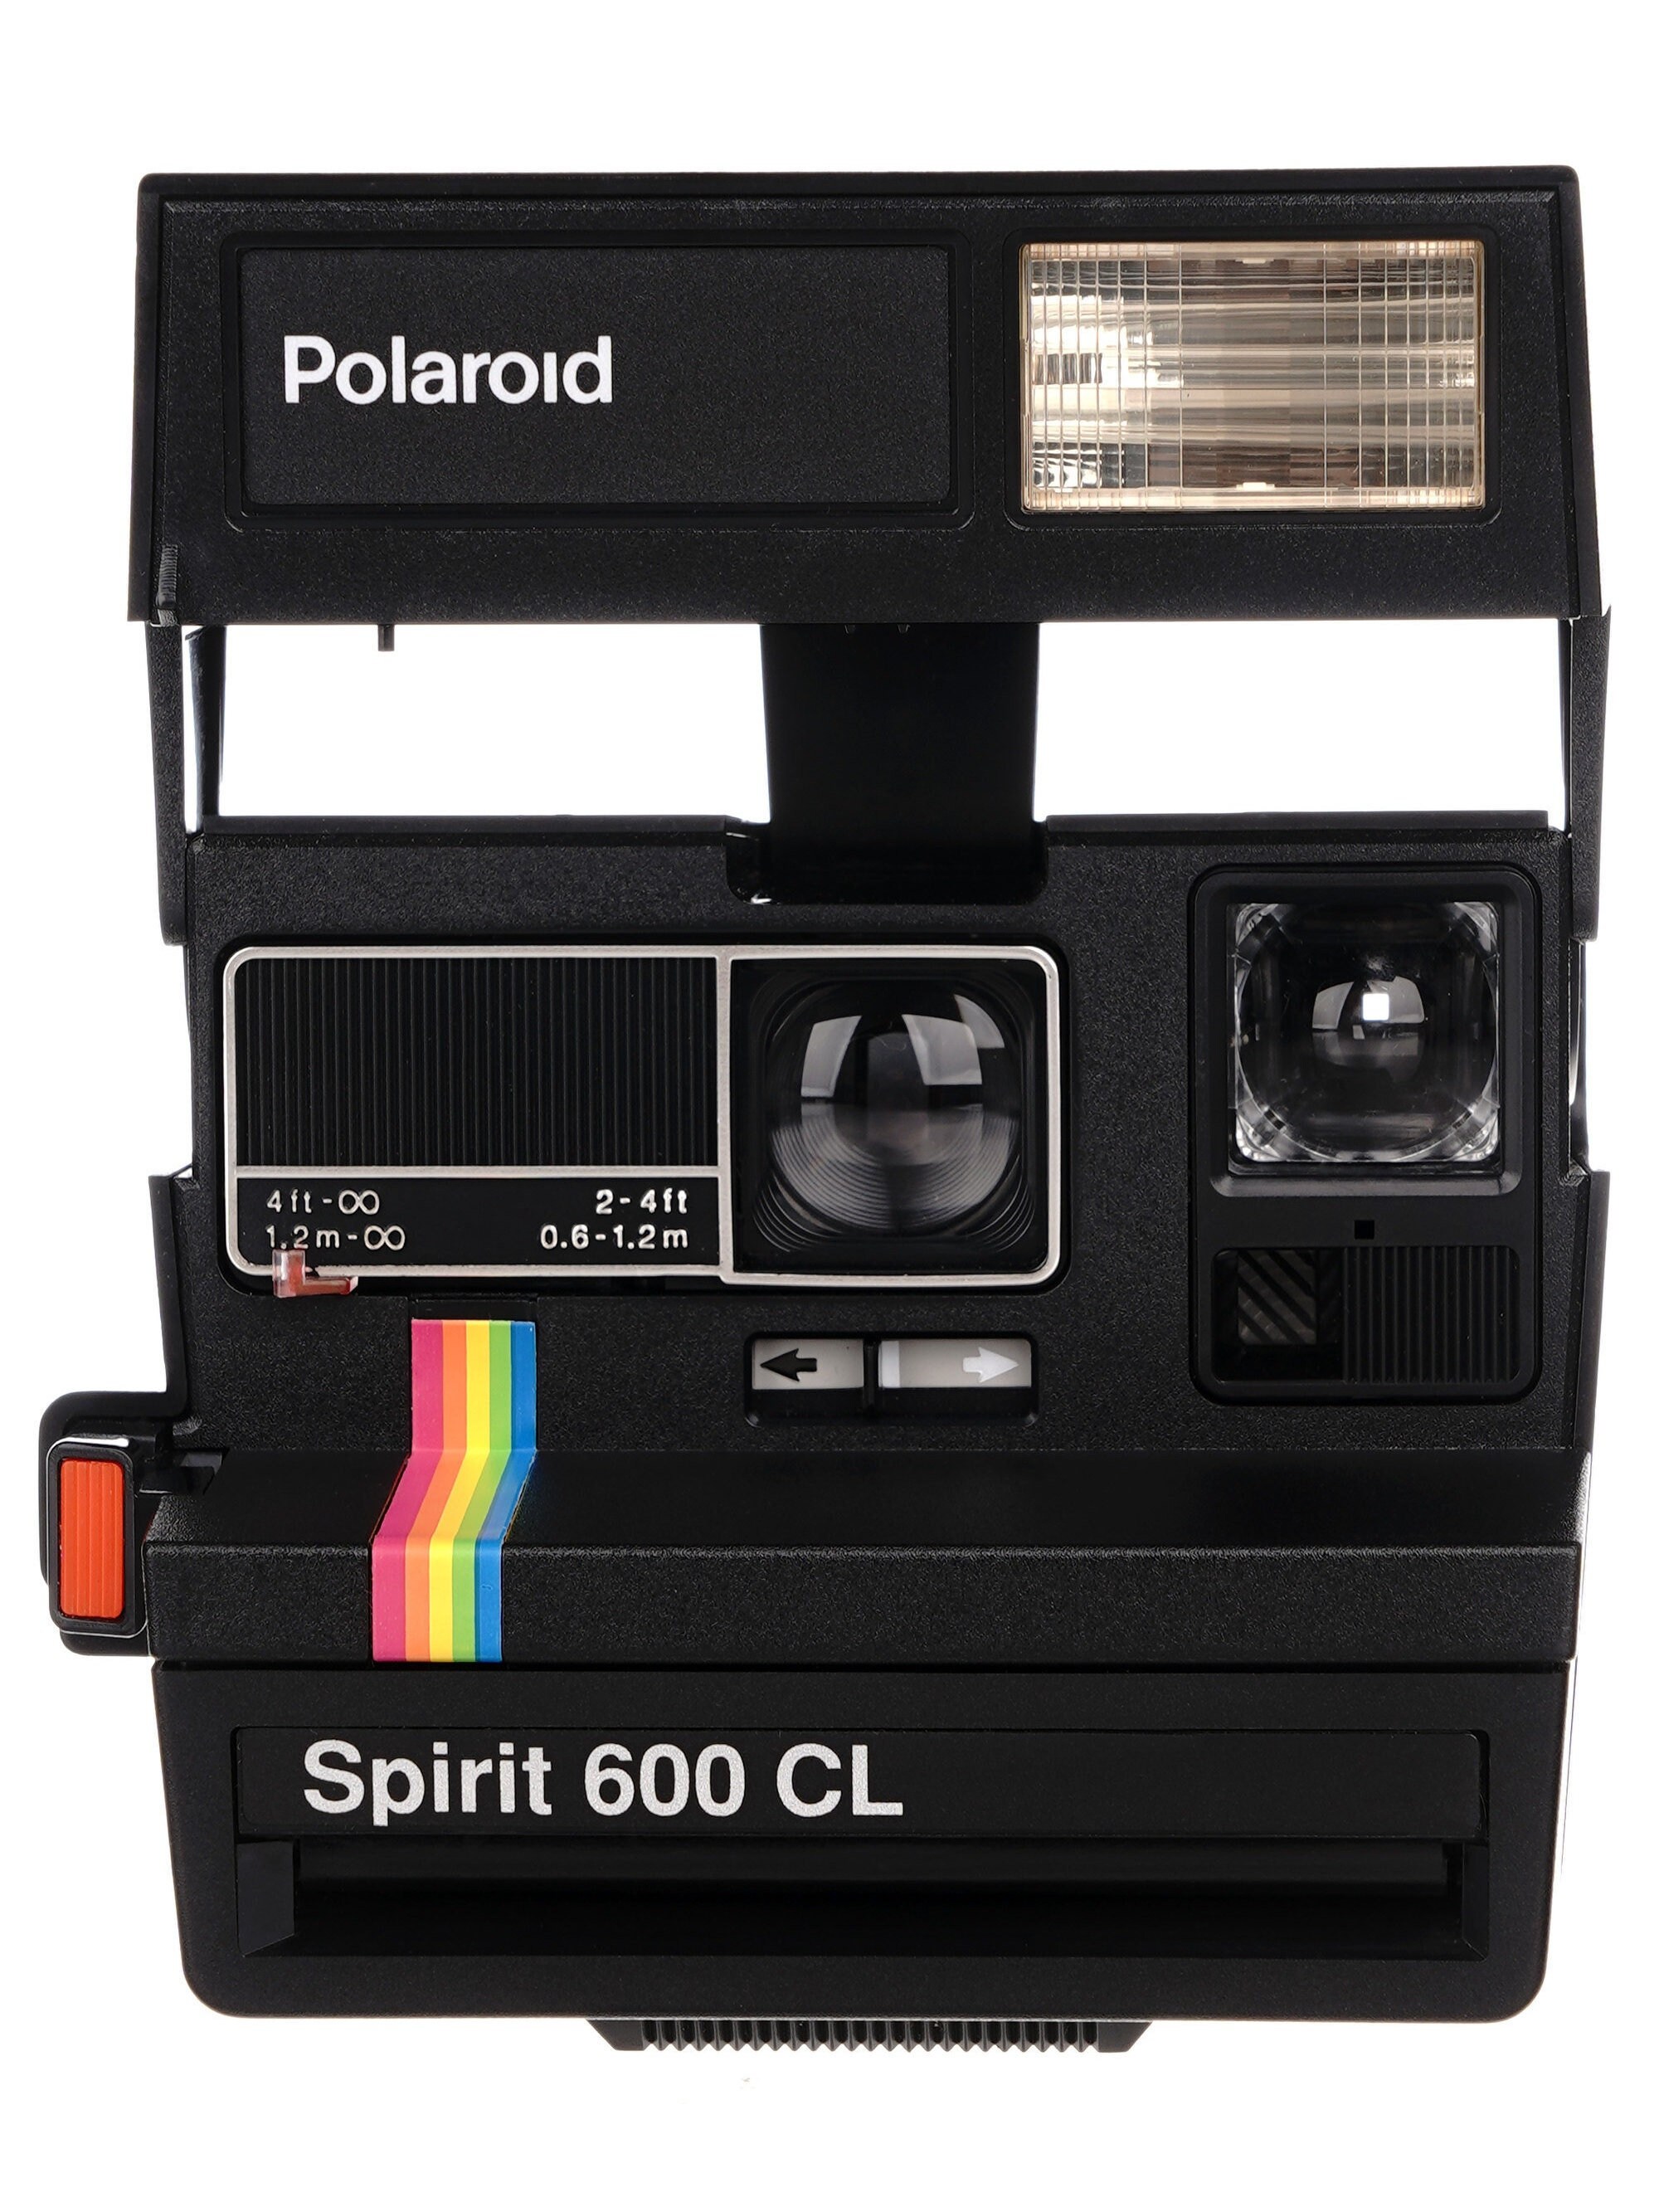 Where could I find the flash add on for this Polaroid 600 Spirit? : r/ Polaroid